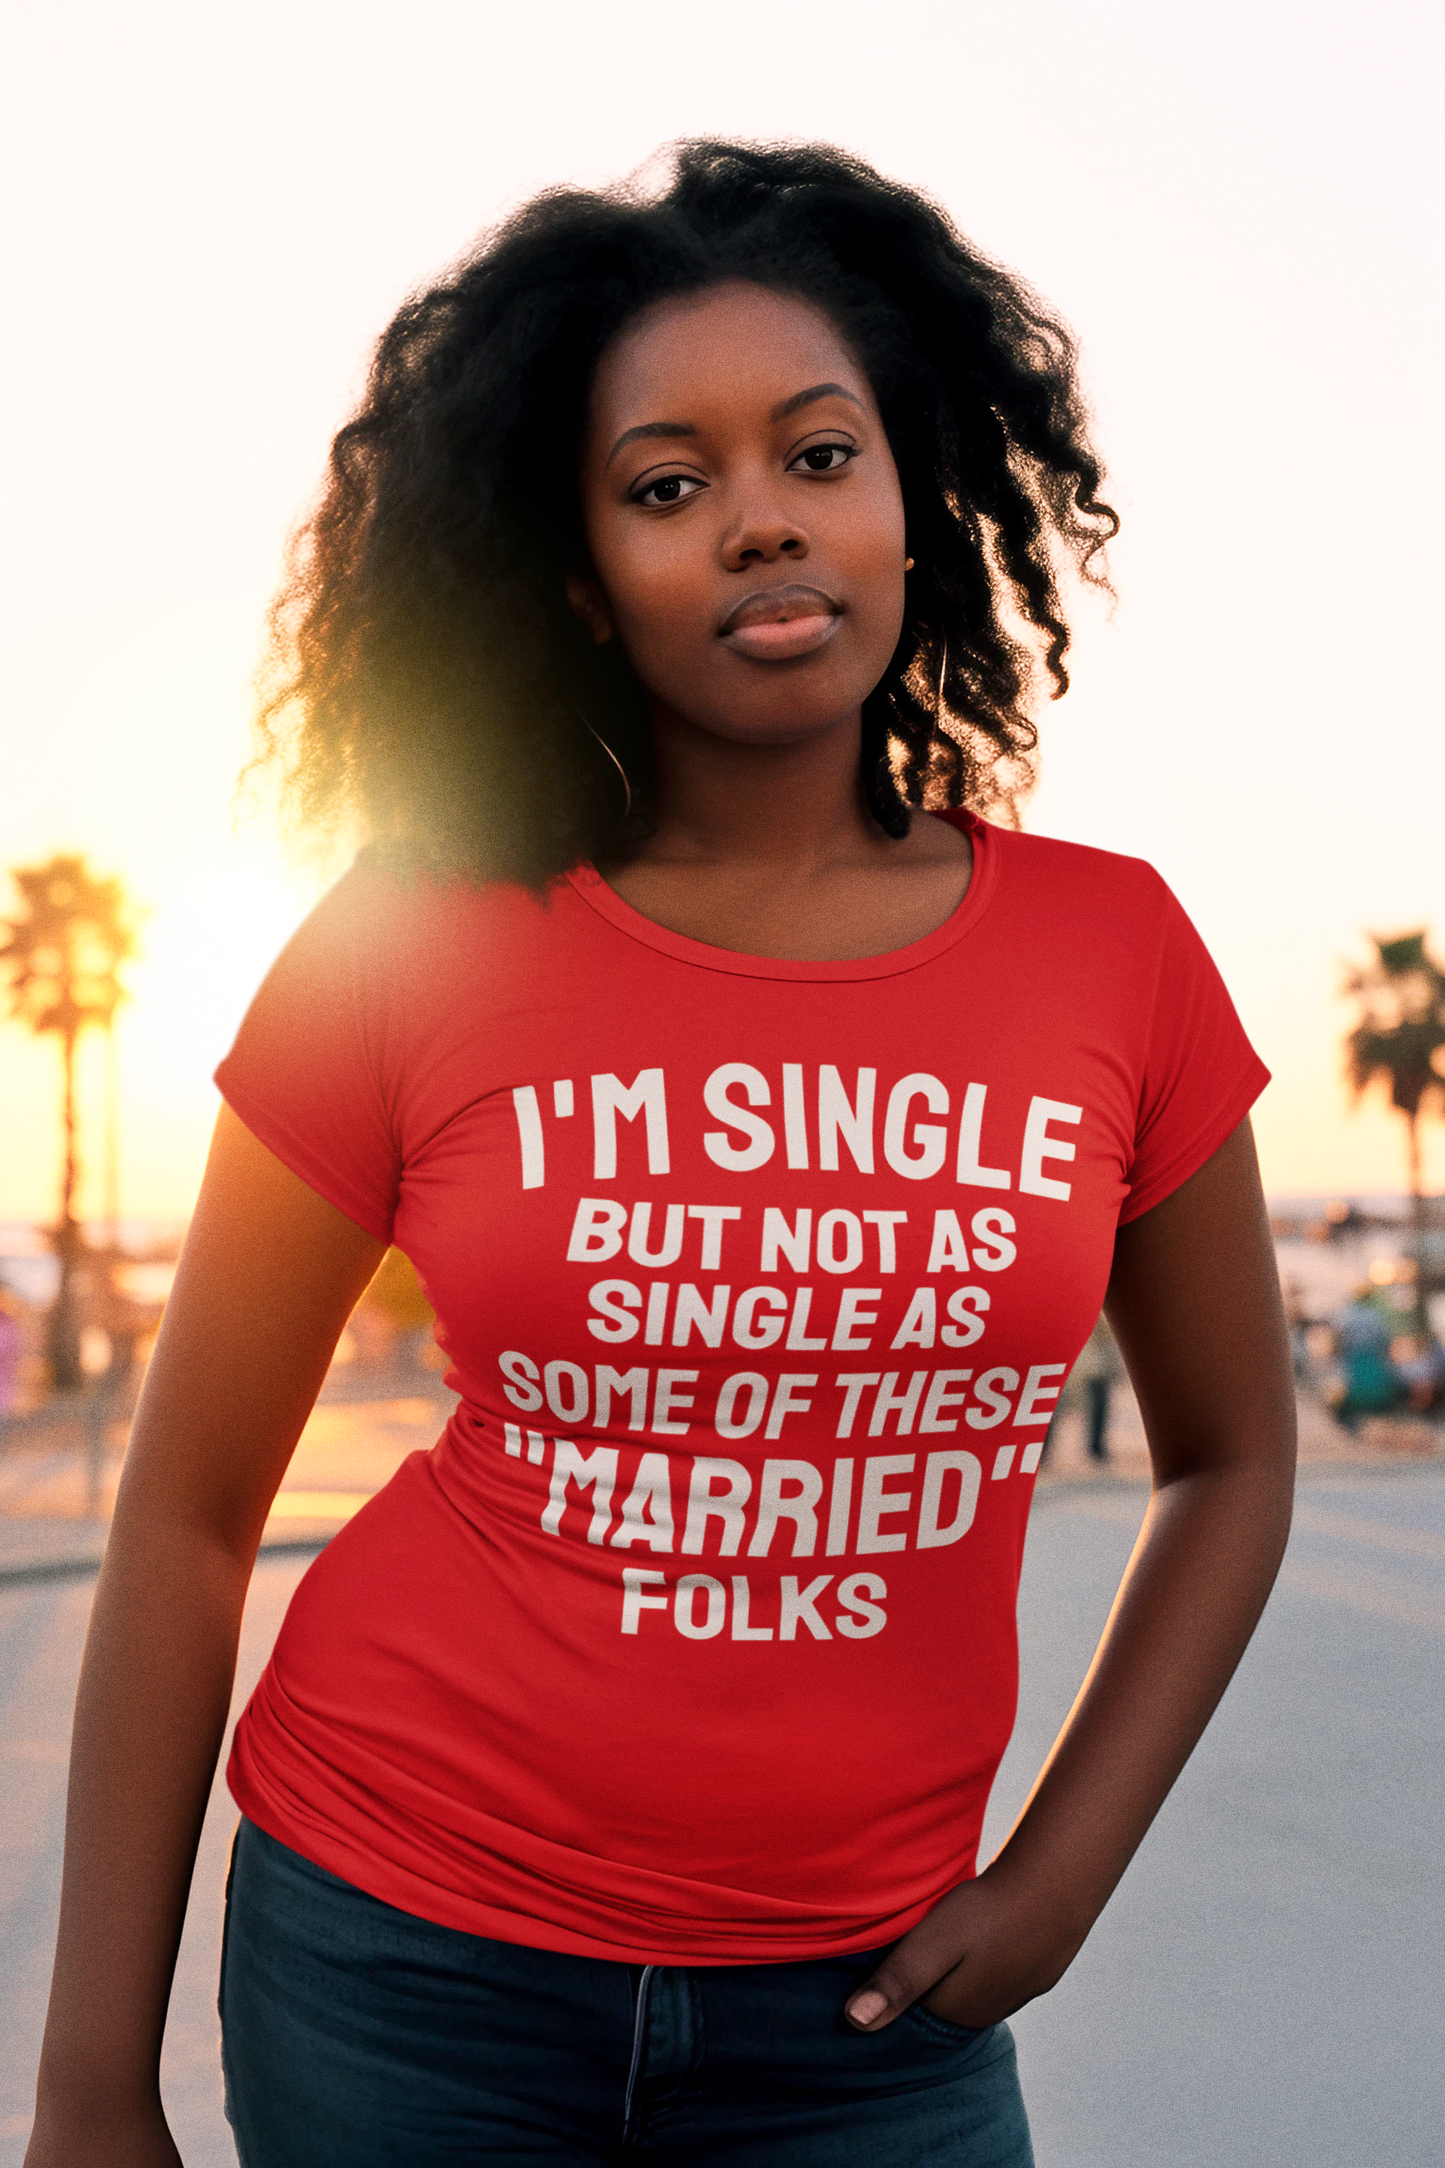 Im Single But Not As Single As Some Of These “MARRIED” Folks T-shirt